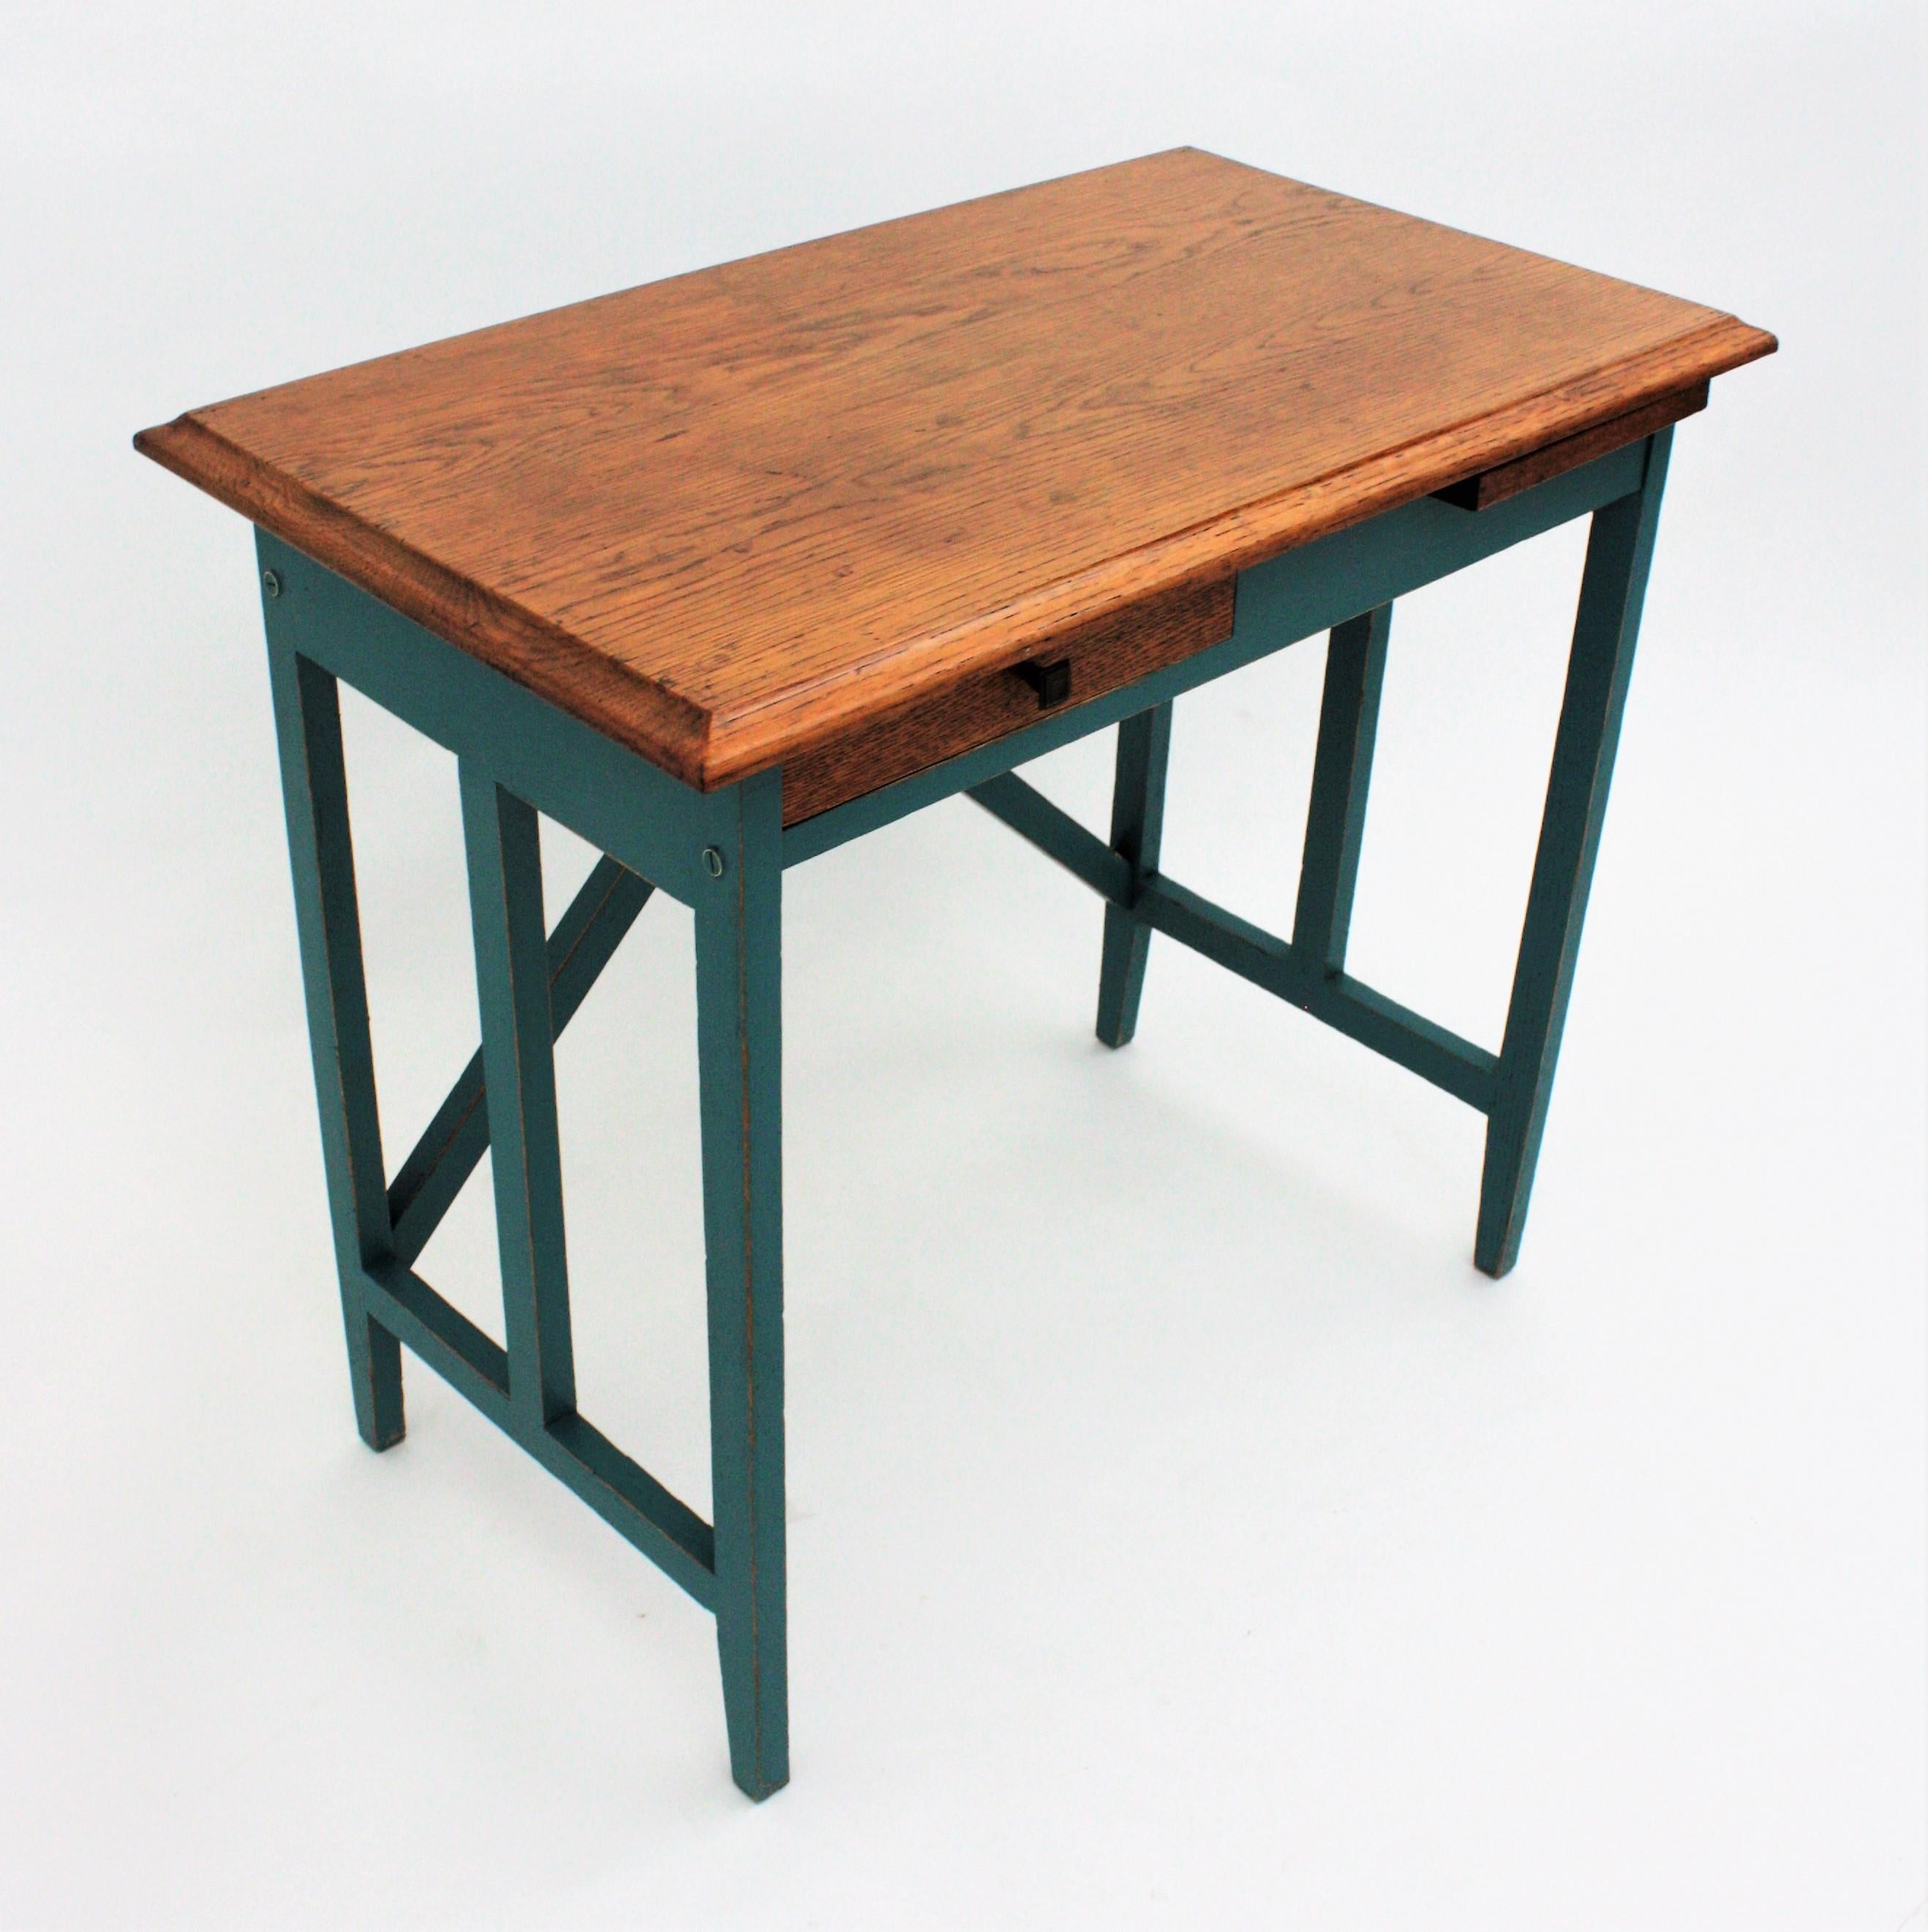 Spanish Desk and Stool in Oak with Green Blue Patina, 1930s For Sale 4